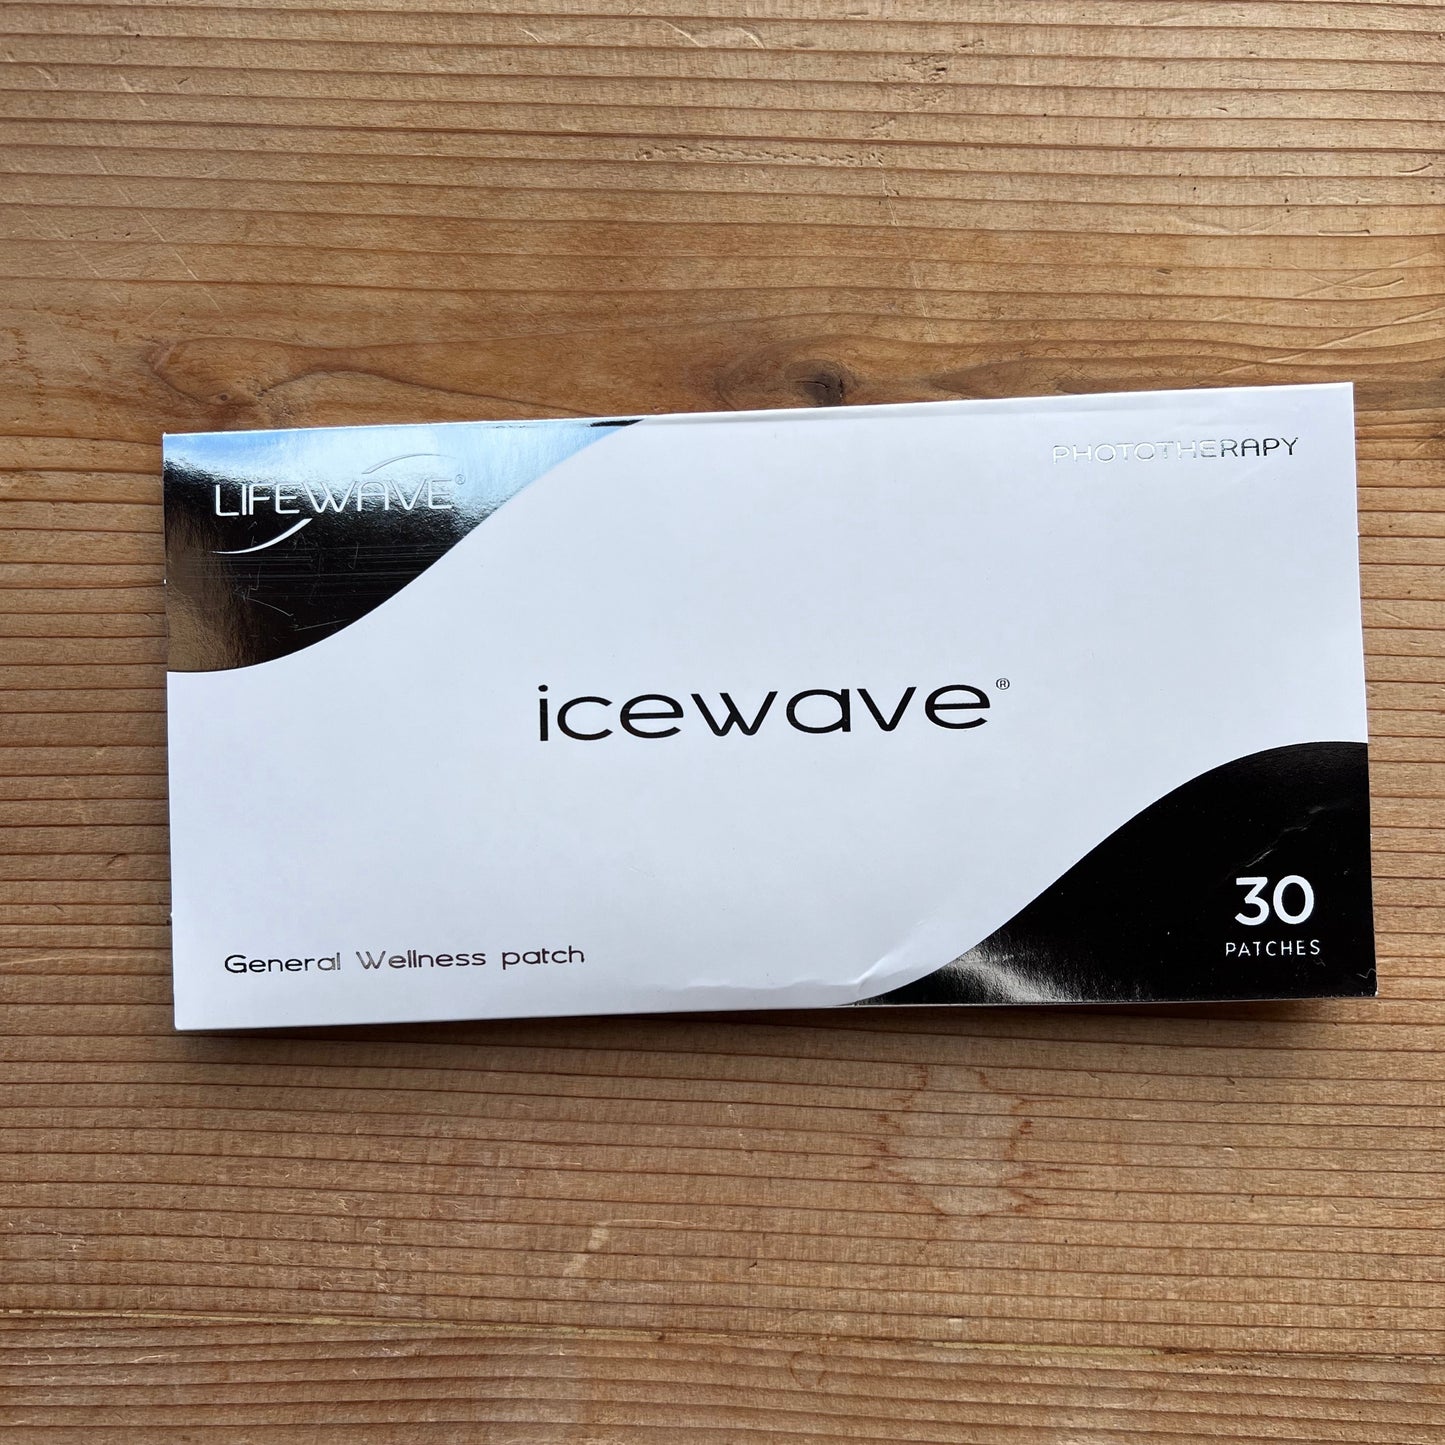 Icewave Phototherapy use the body’s natural energy flow (or bioelectricity) to reduce pain and Inflammation